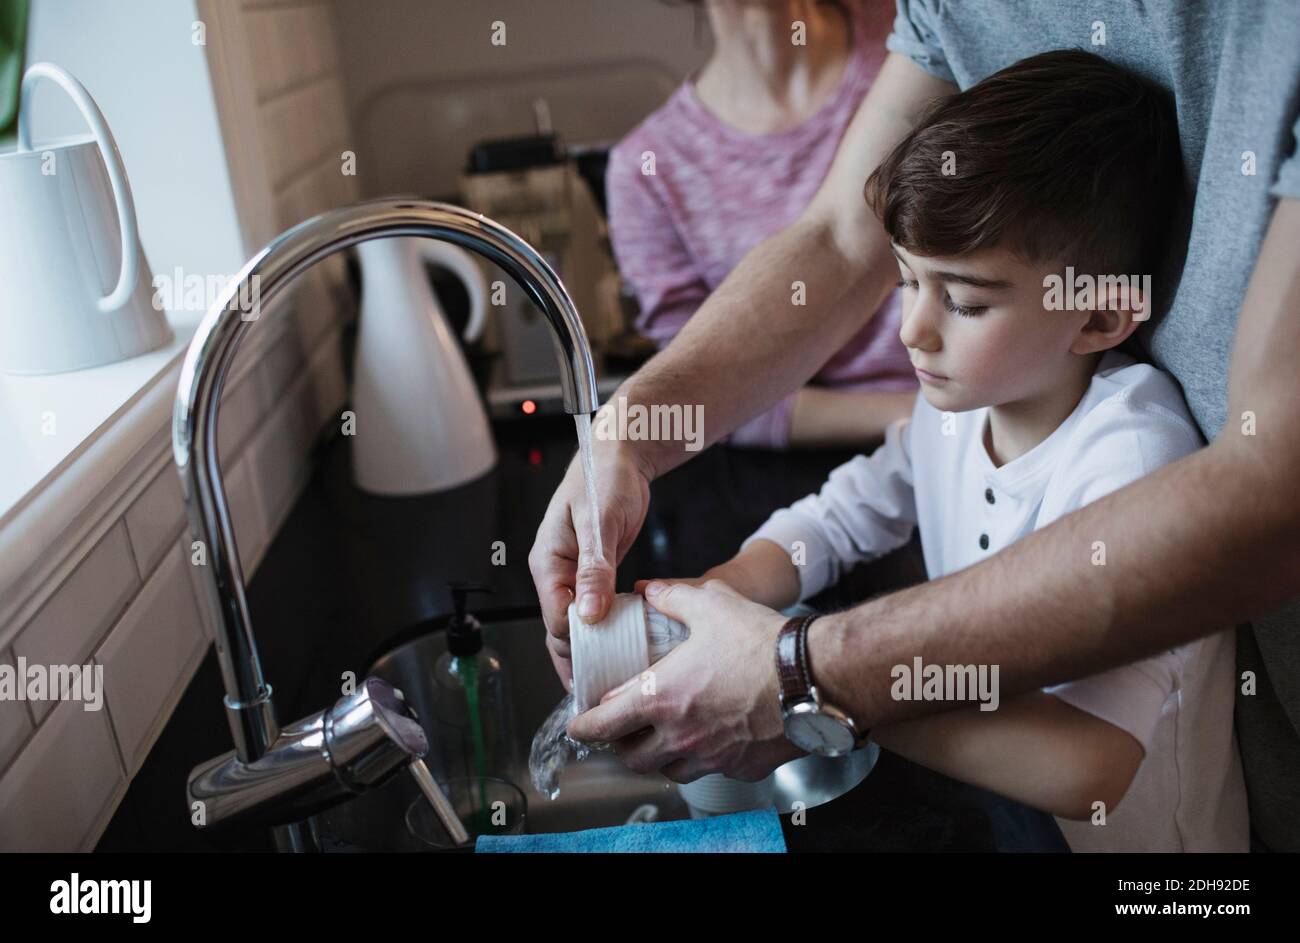 Midsection of man assisting boy in washing dishes by woman in kitchen Stock Photo